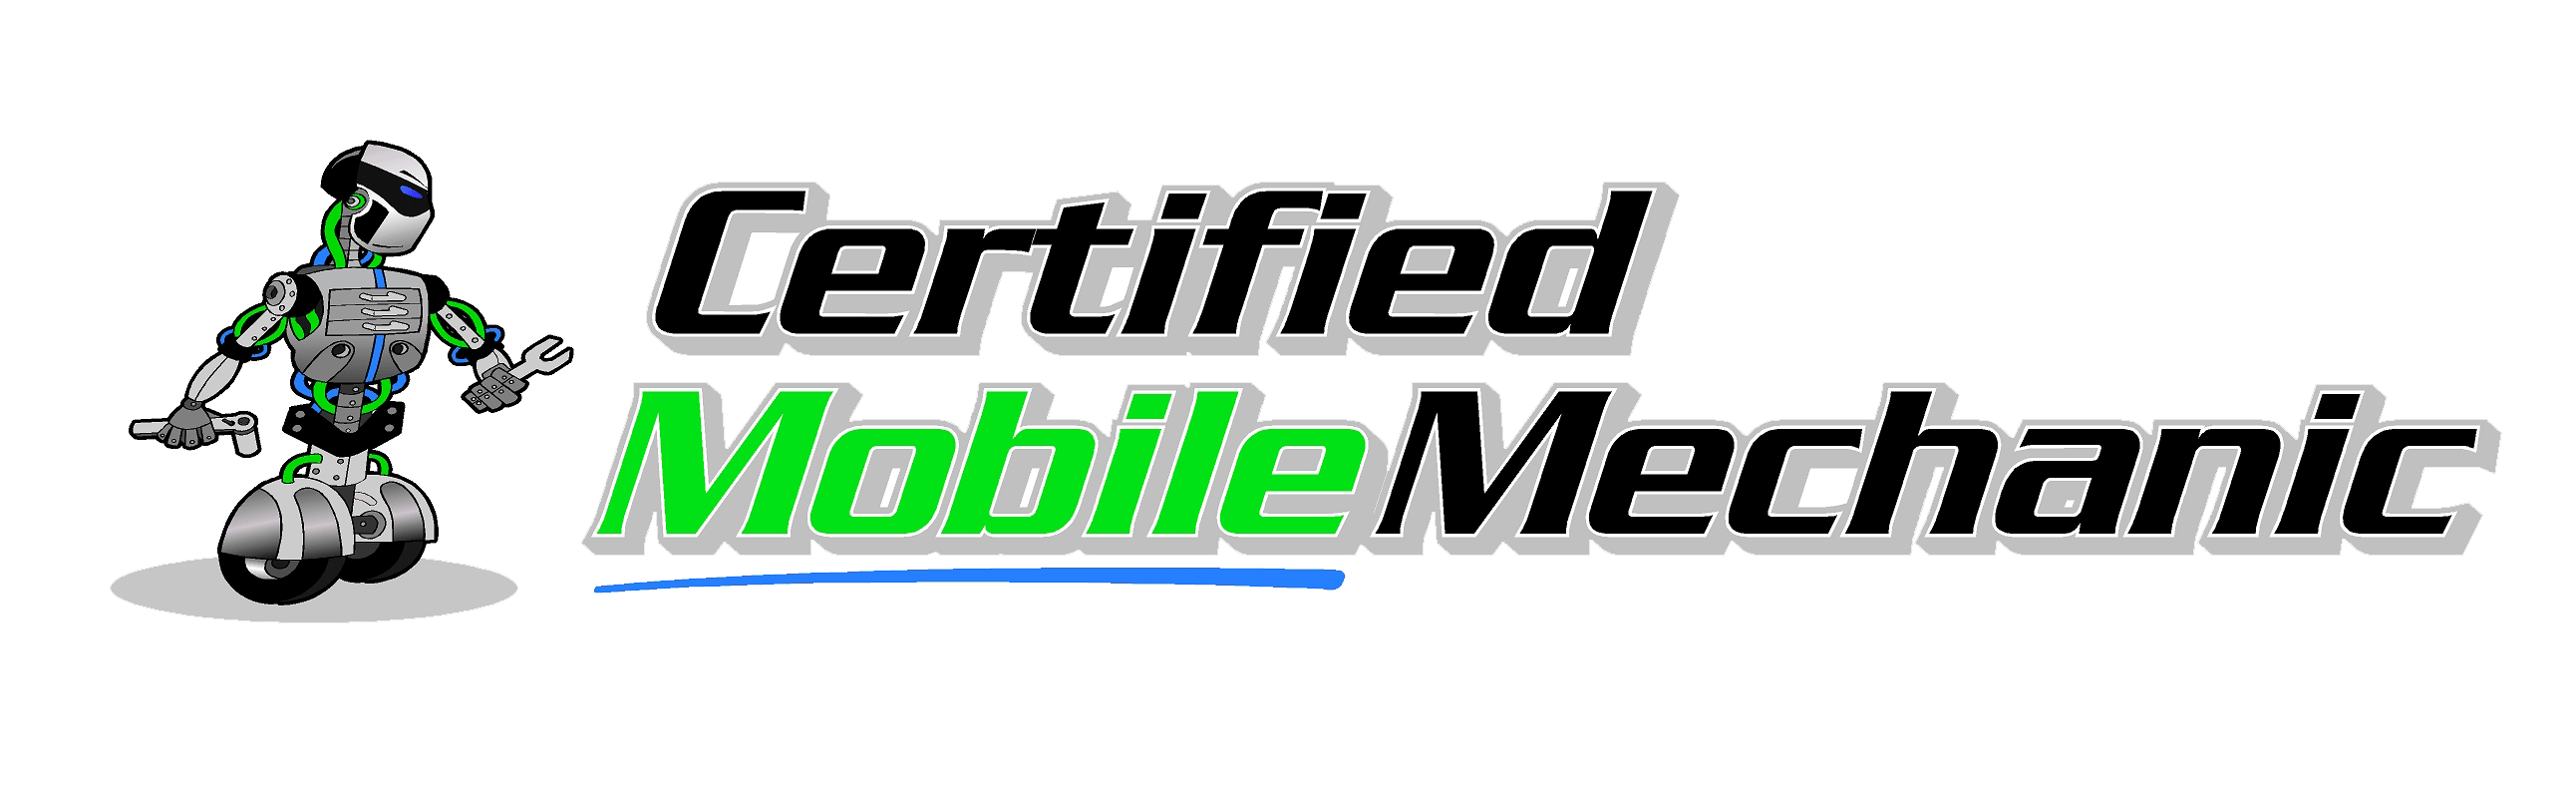 Mobile Mechanic Logo - The Certified Mobile Mechanic – The Certified Mobile Mechanic